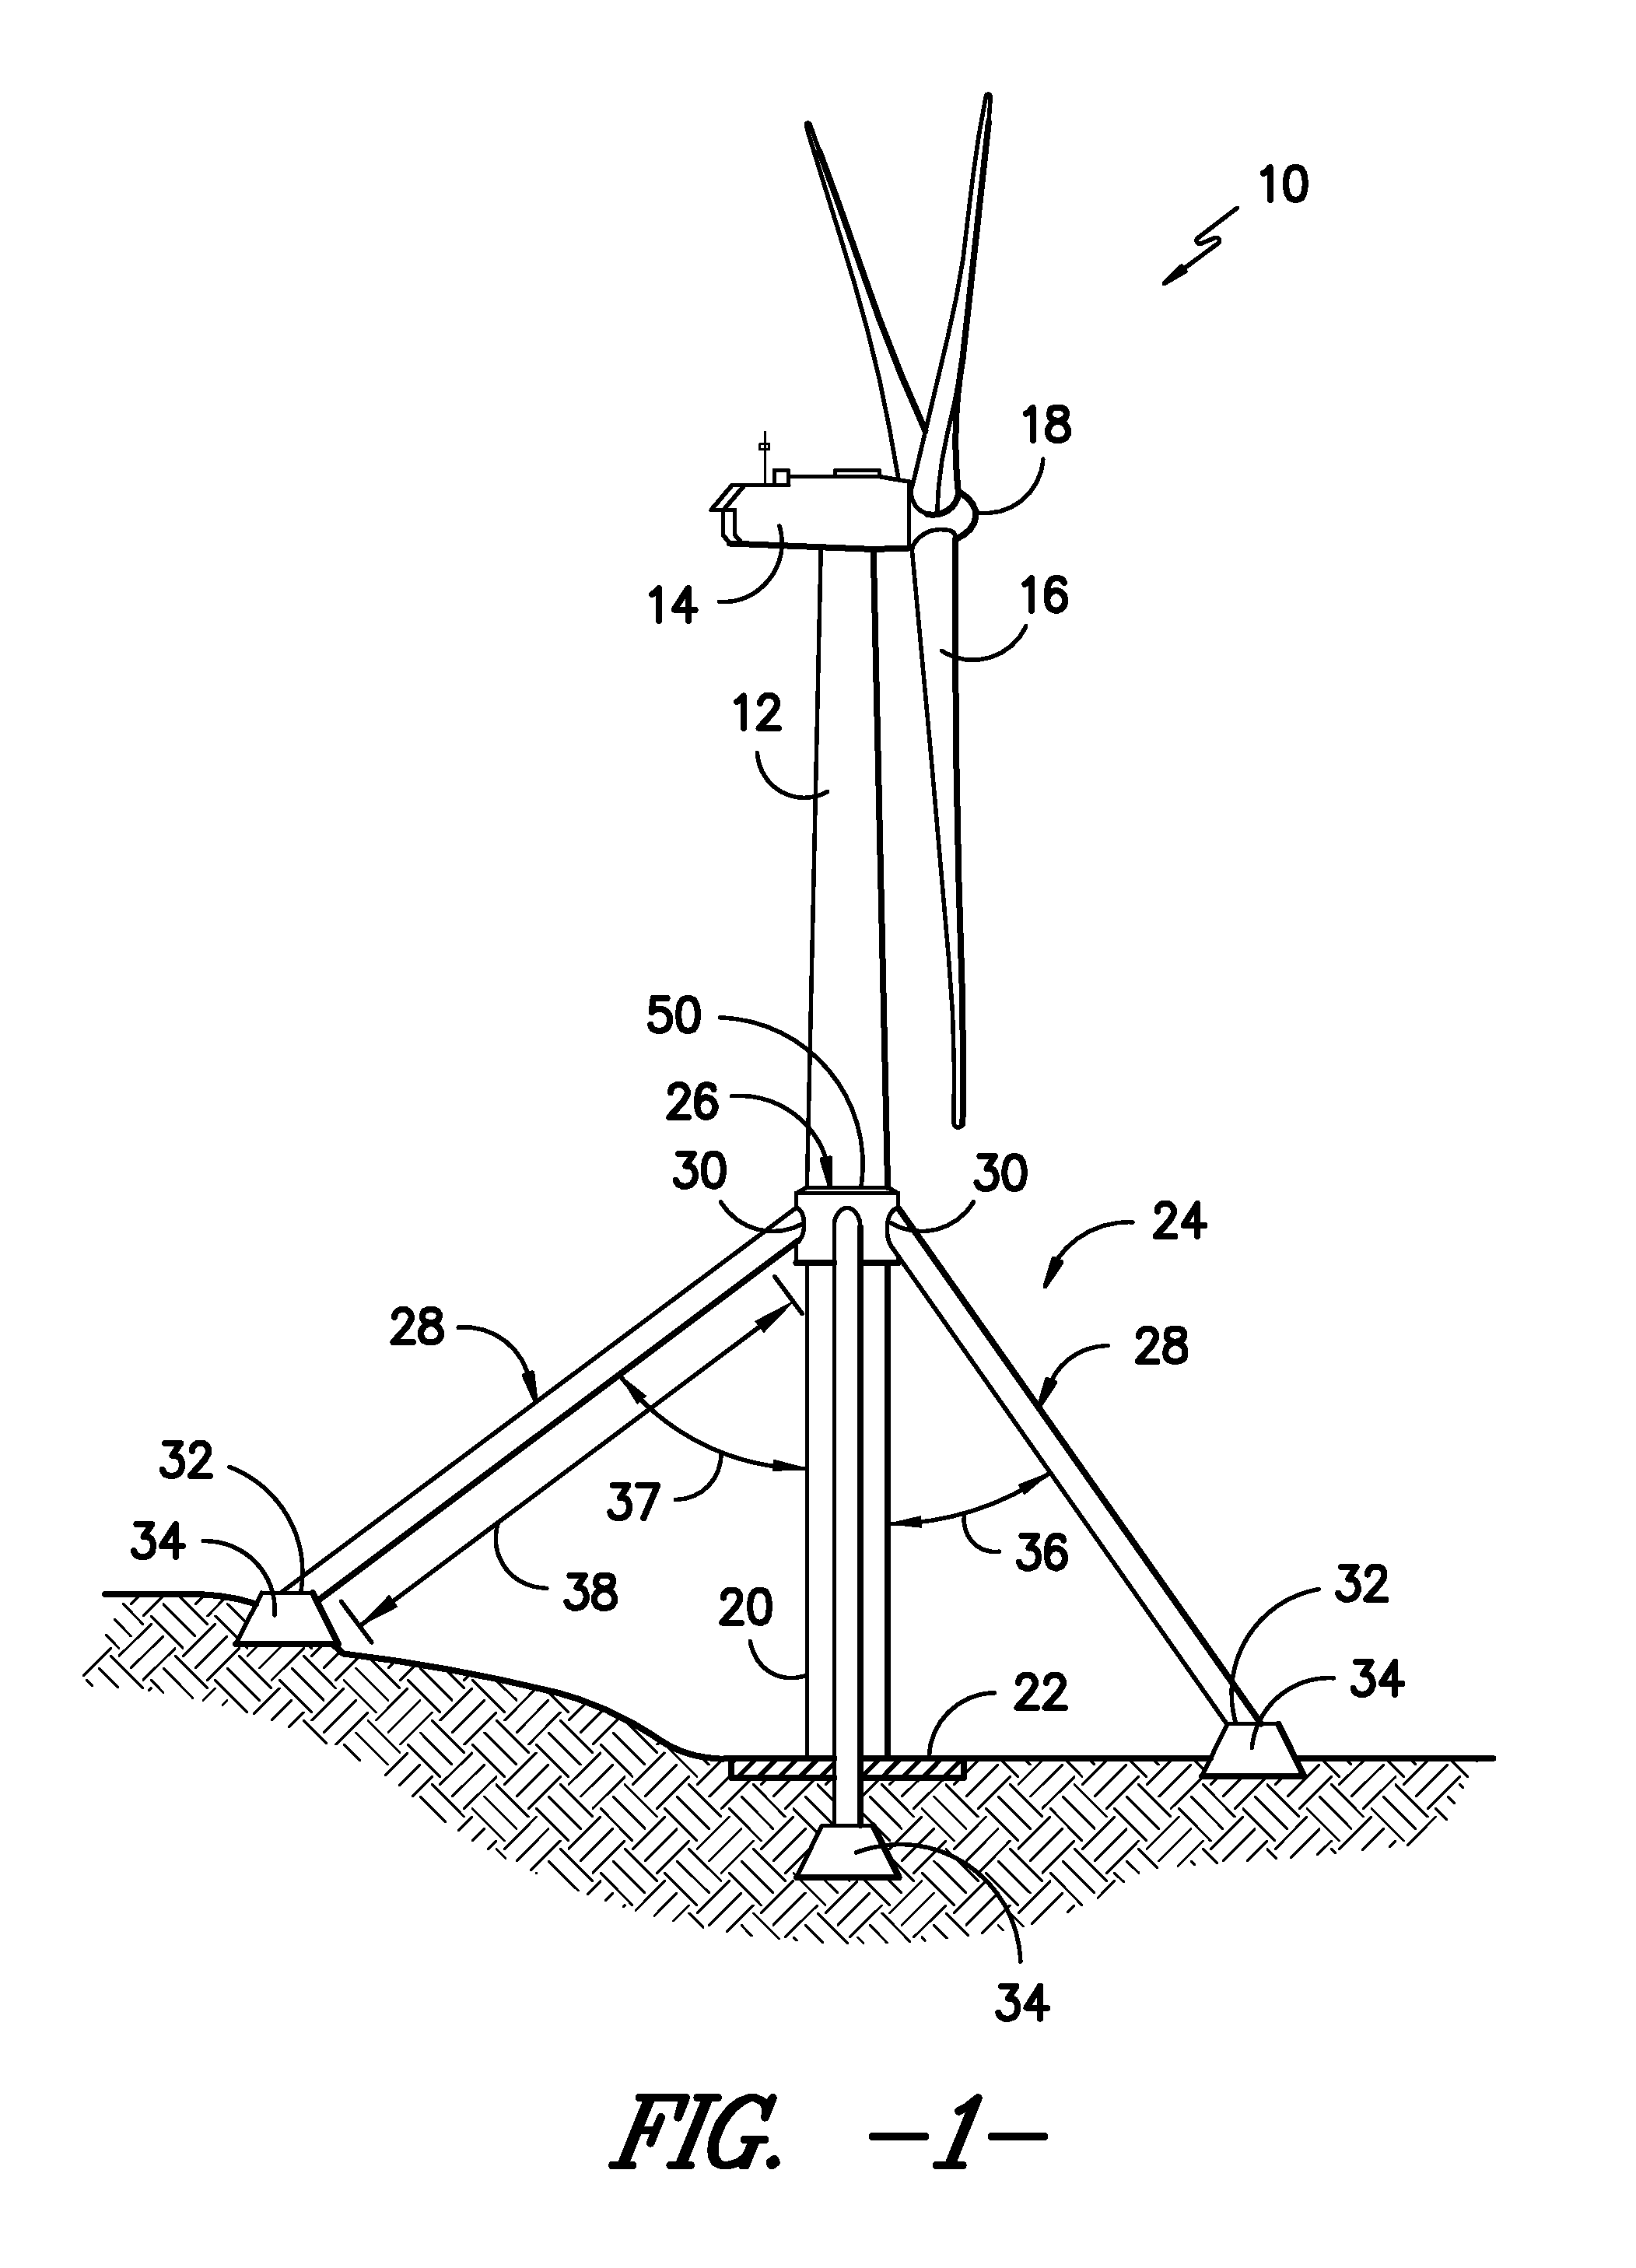 Onshore wind turbine with tower support system